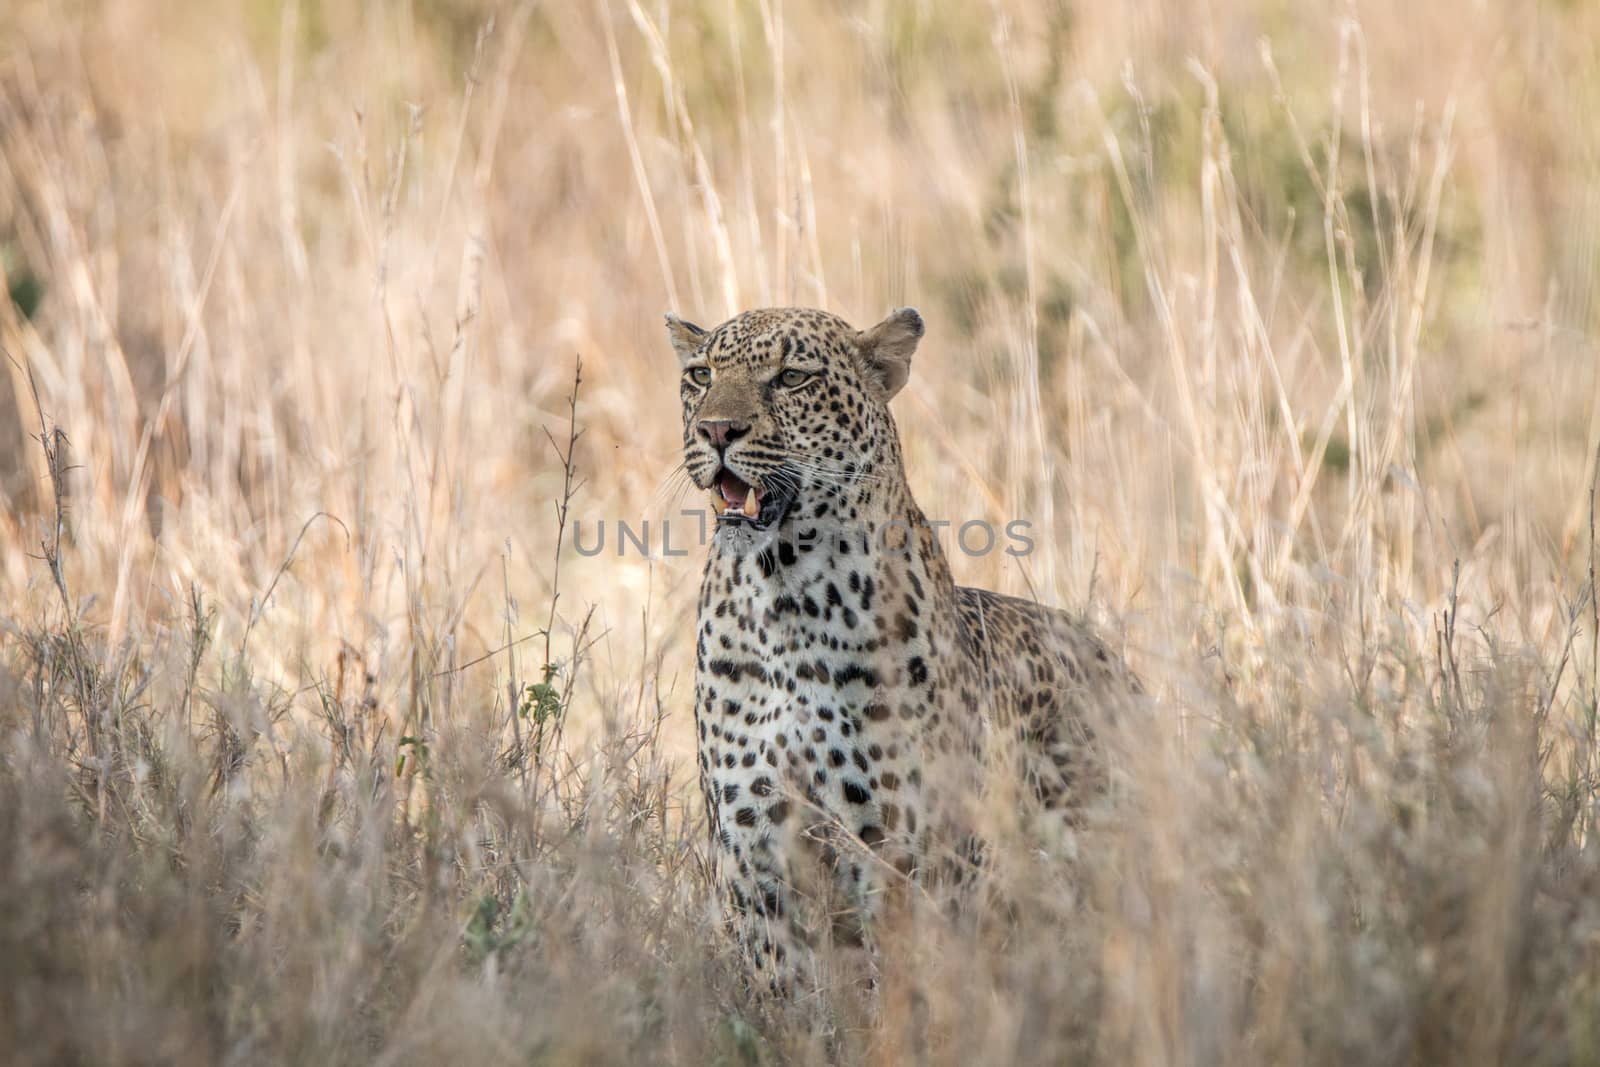 Leopard in the grass in the Kruger National Park, South Africa.